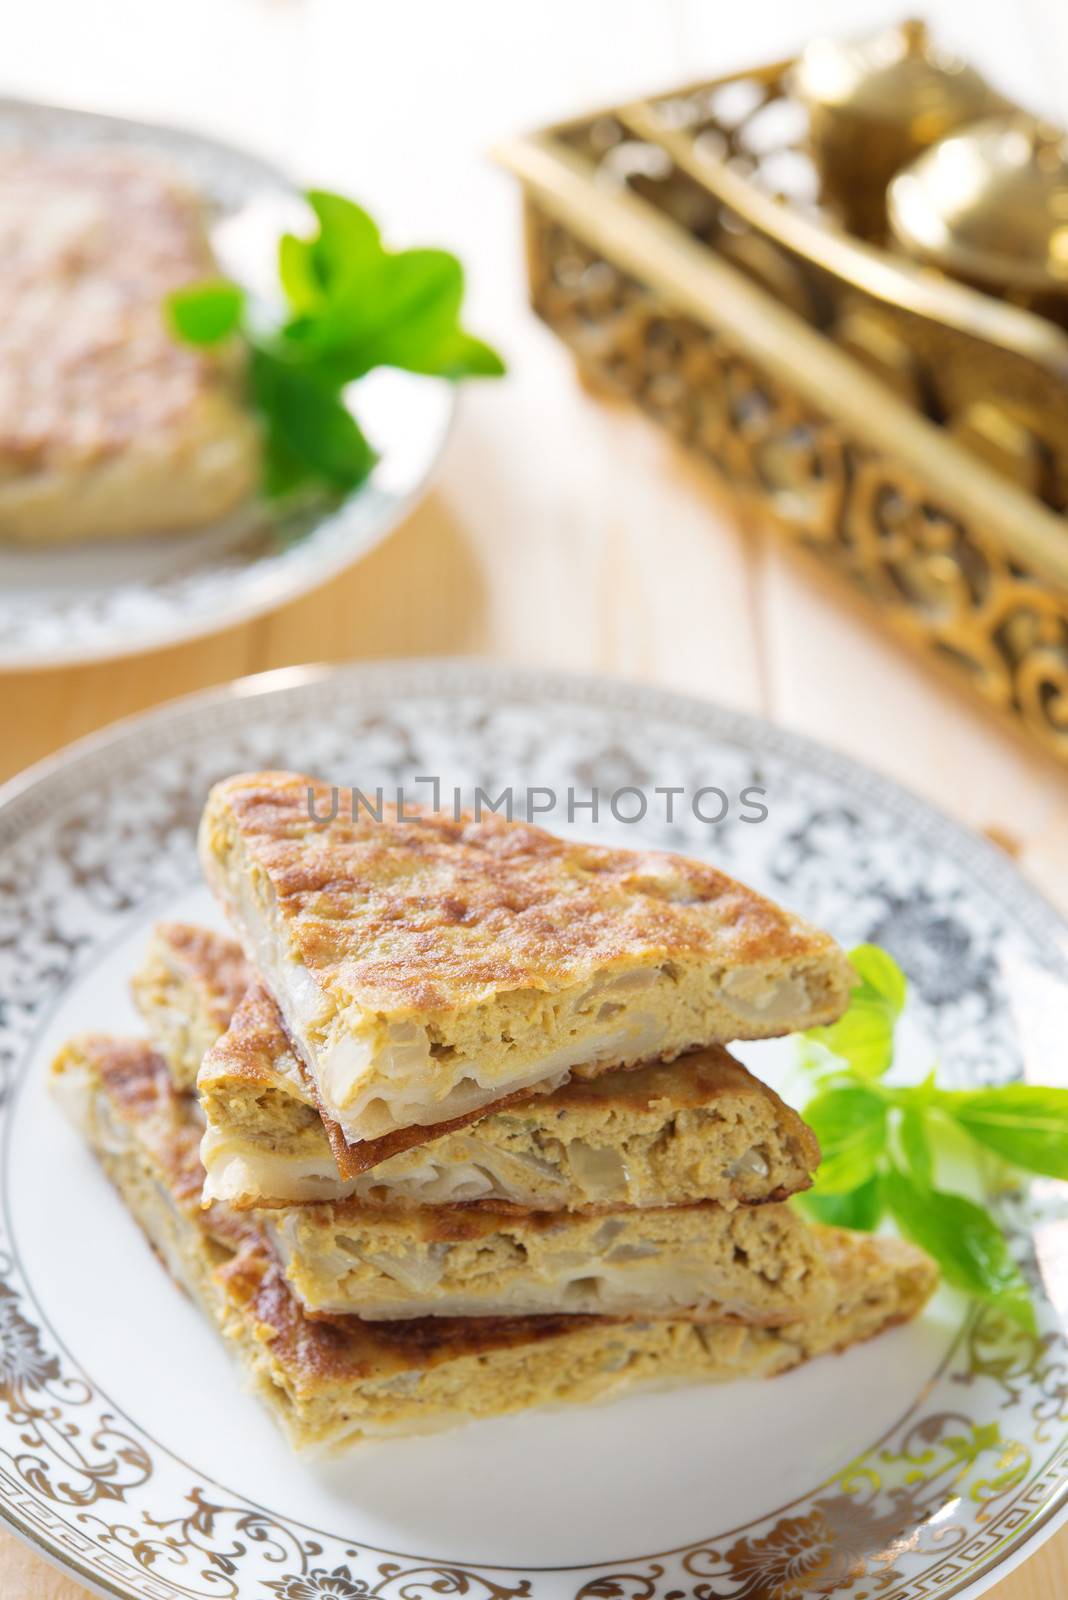 Mutabbaq or Murtabak is a stuffed Arabic bread, also known as "Fatatari" in some parts of Middle East.